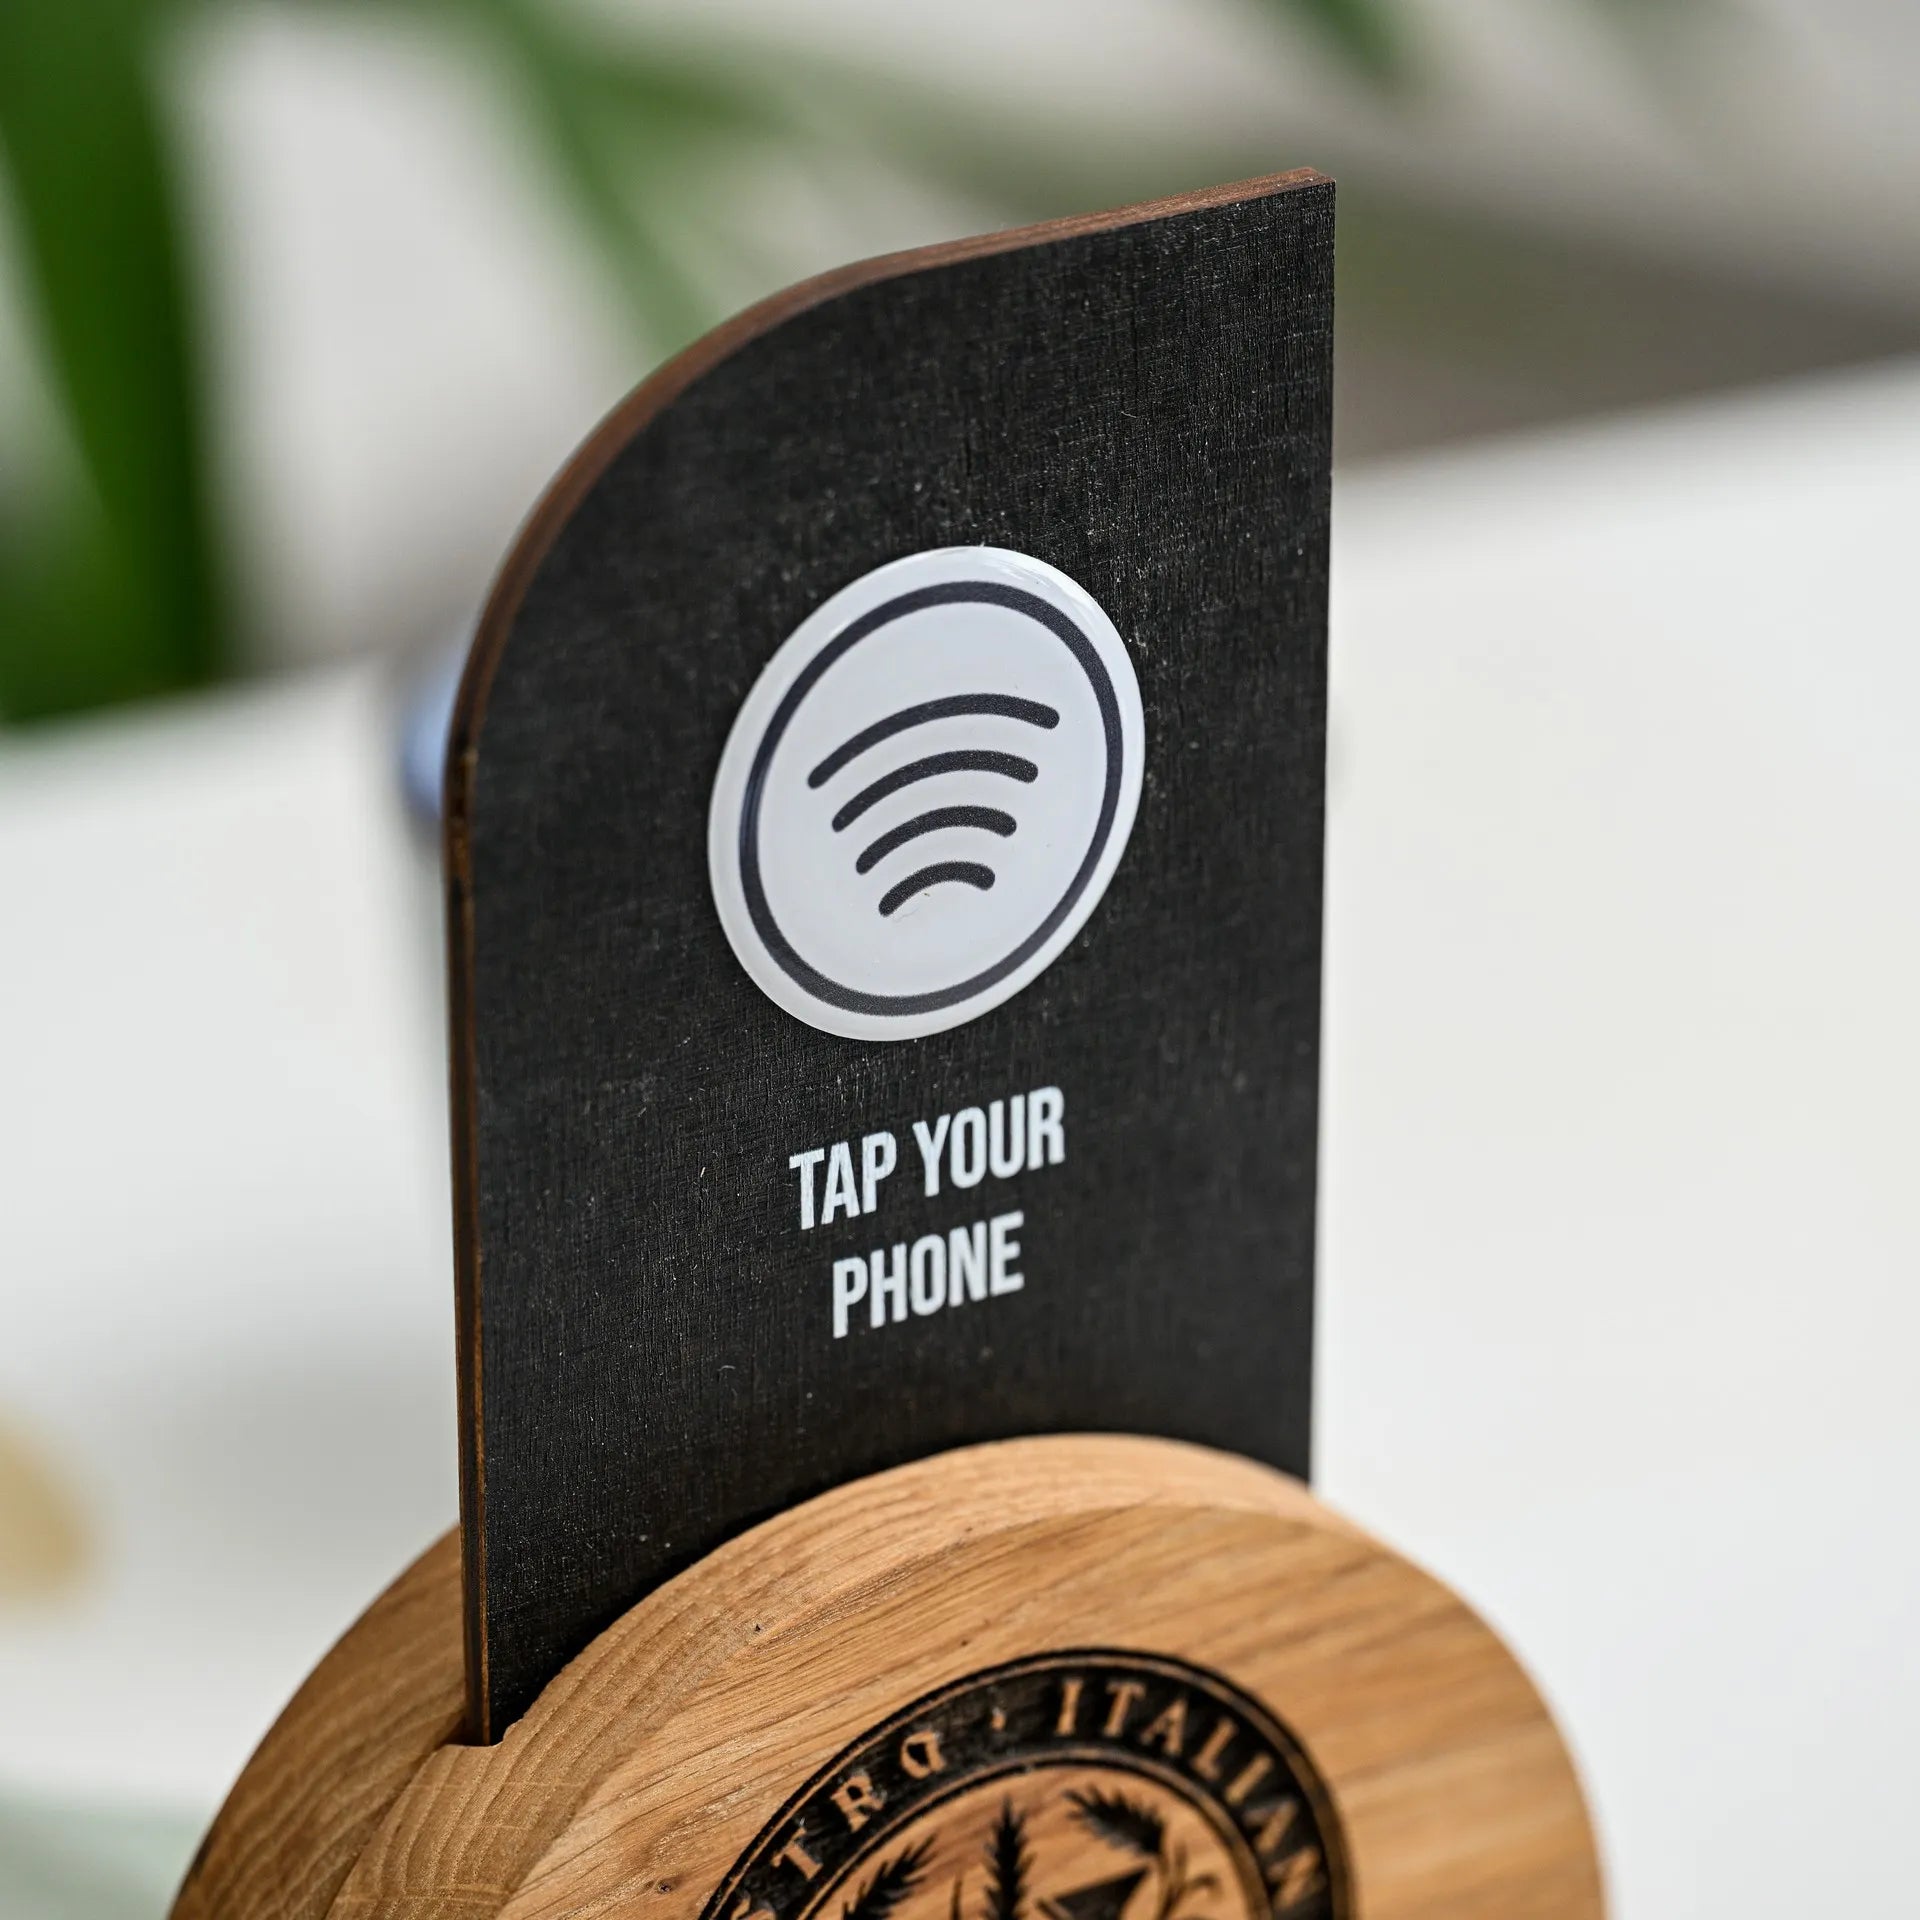 Enhance your customer experience with our NFC tag and QR code sign elegantly displayed on a wooden stand.